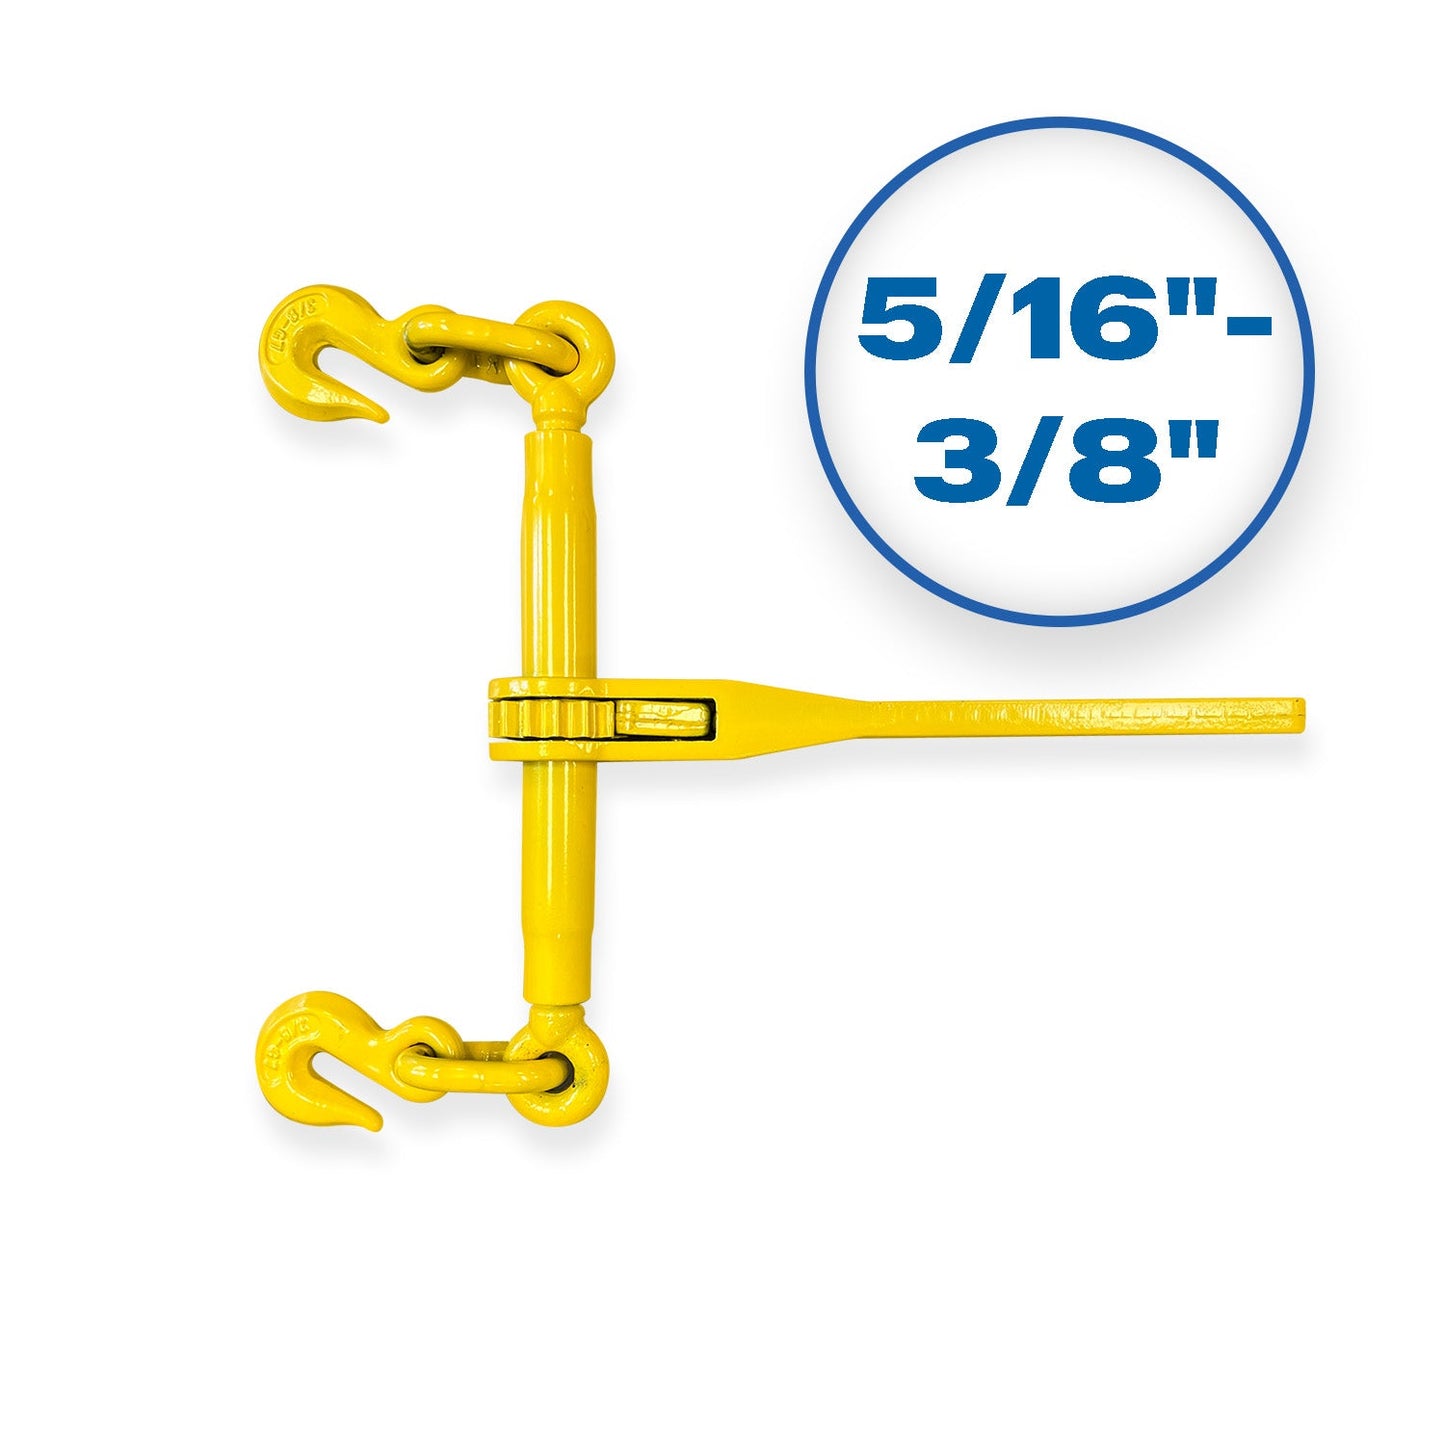 Ratchet Chain Binder for 5/16"-3/8" Chains - 6,600 lbs Capacity